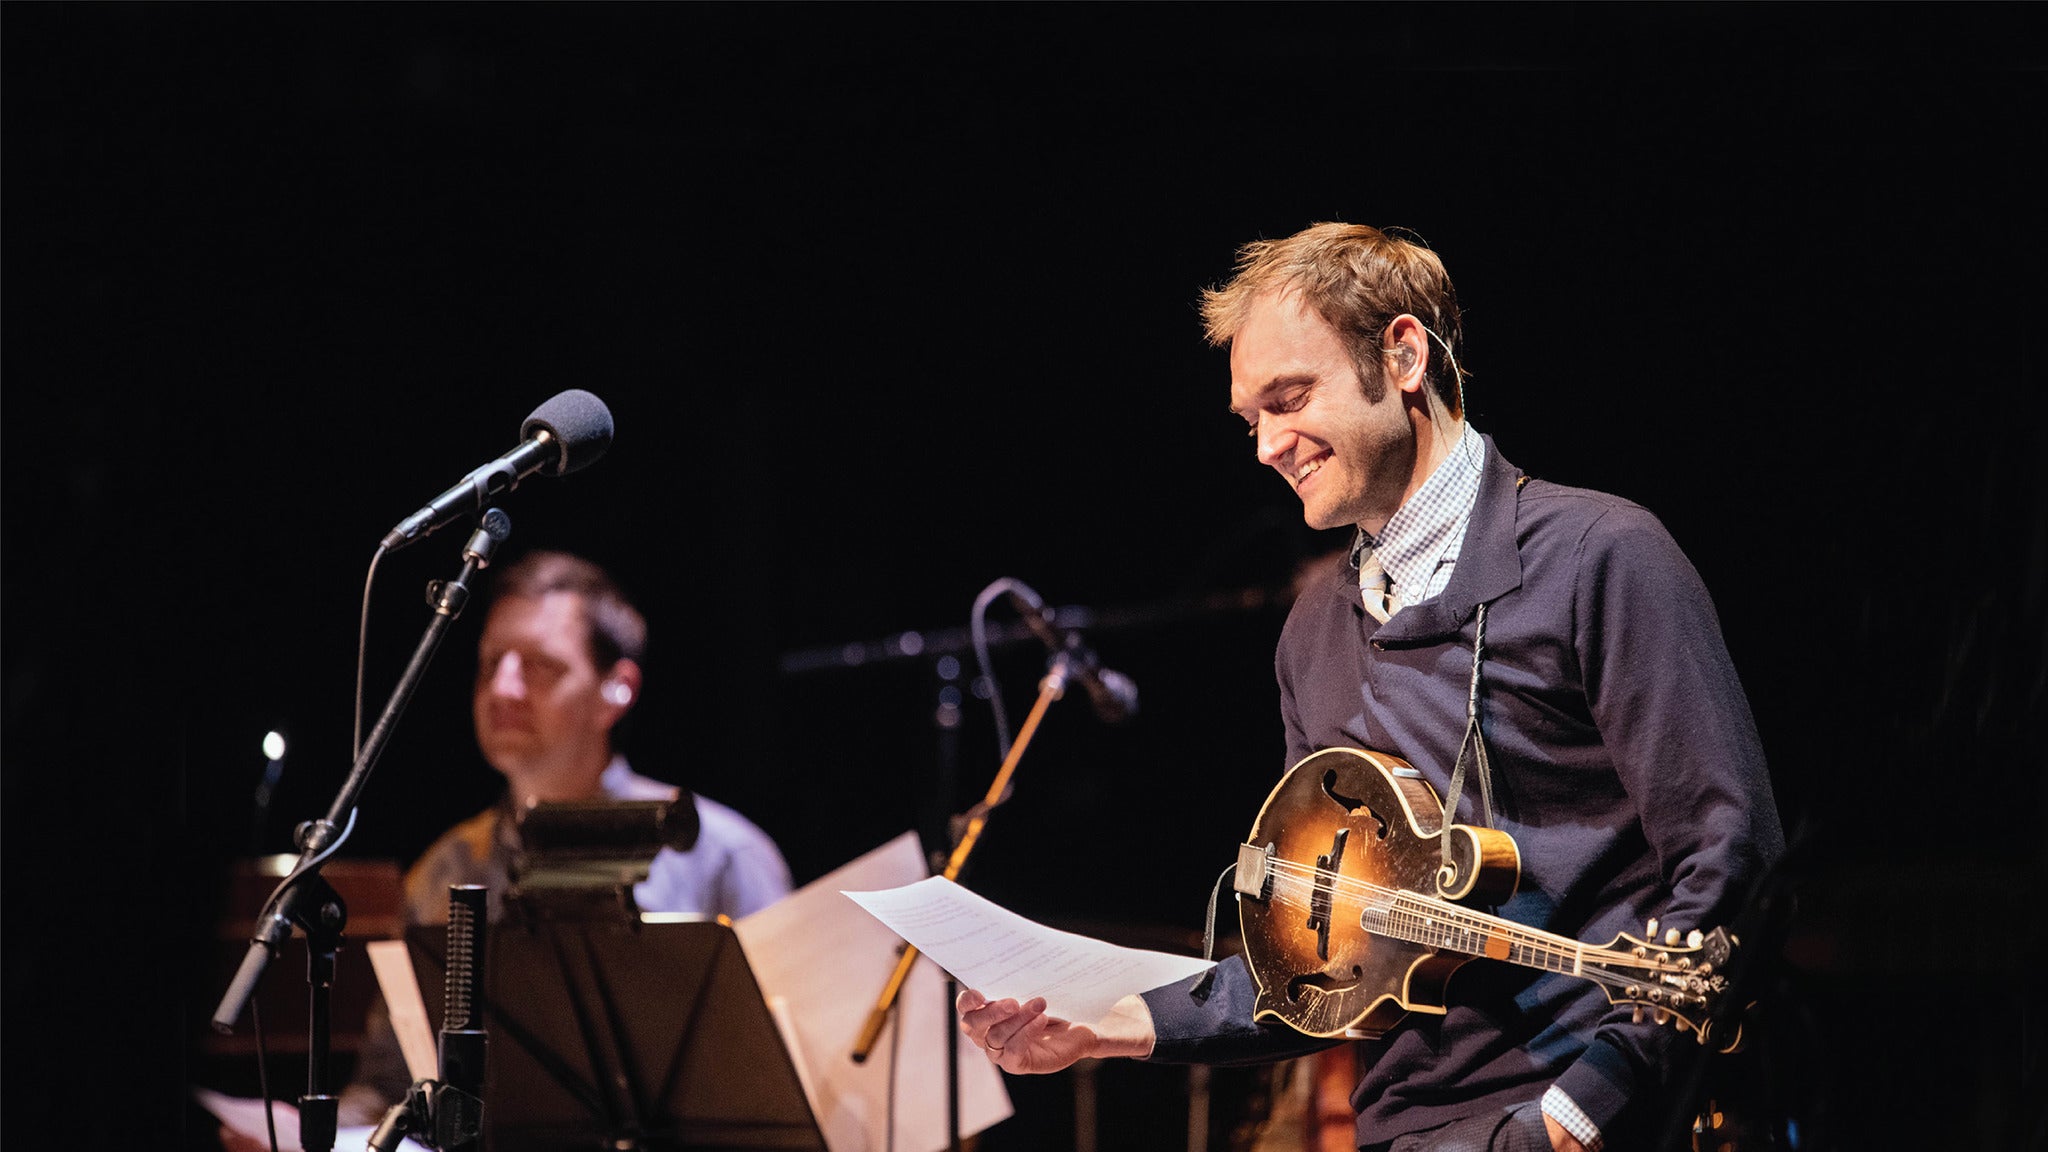 Live from Here With Chris Thile in New York promo photo for Citi® Cardmember presale offer code